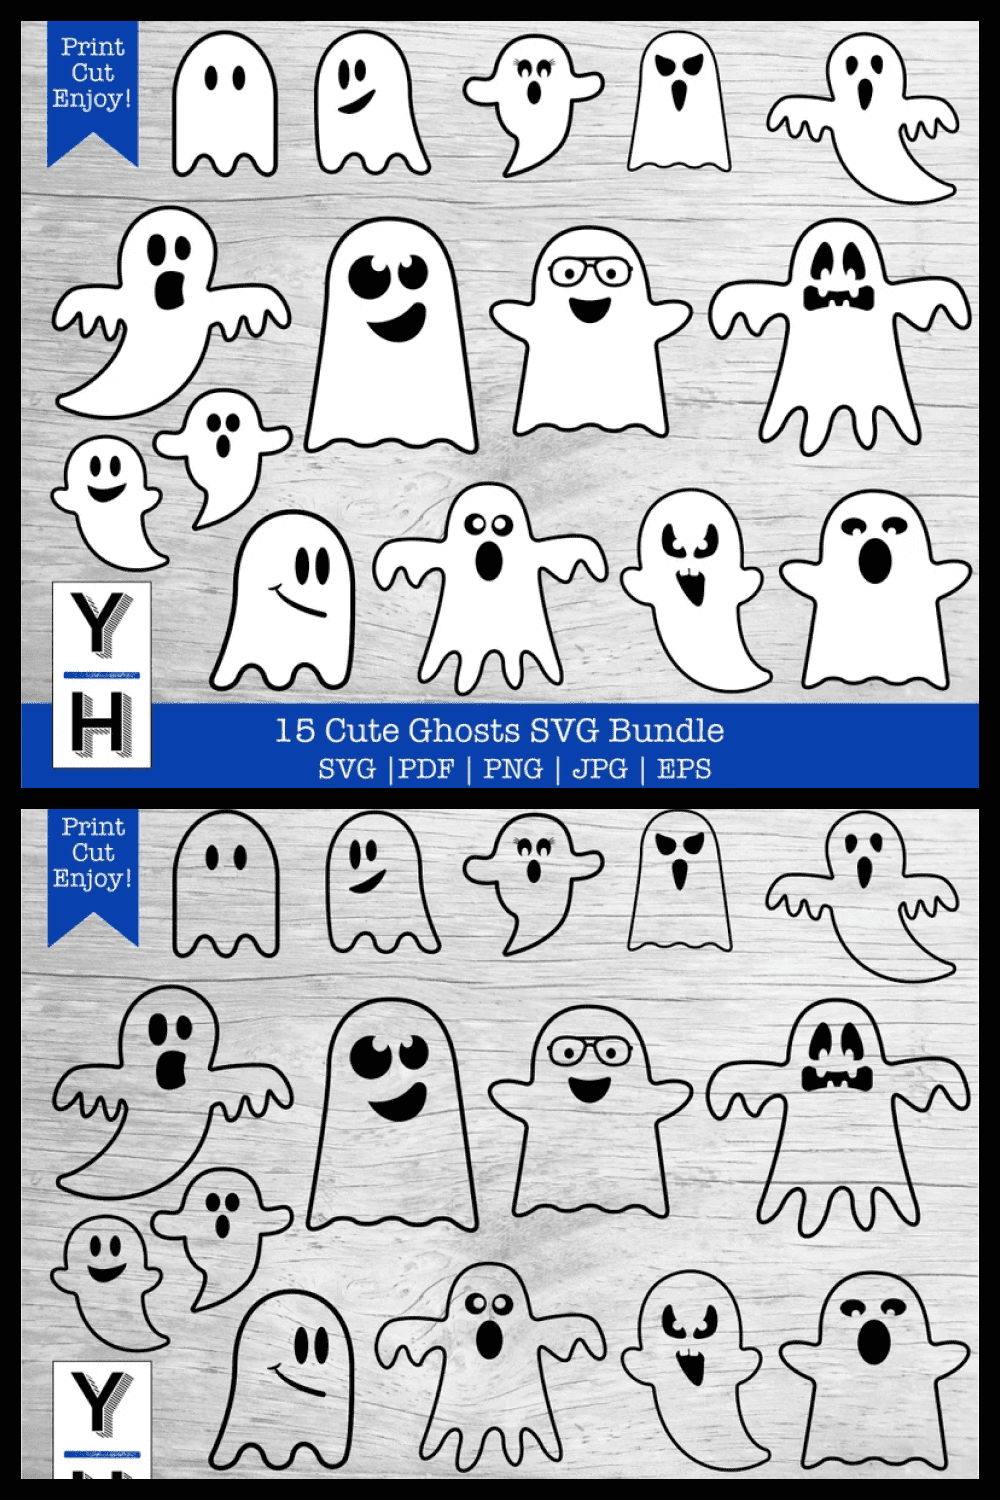 Ghosts have emotions too.